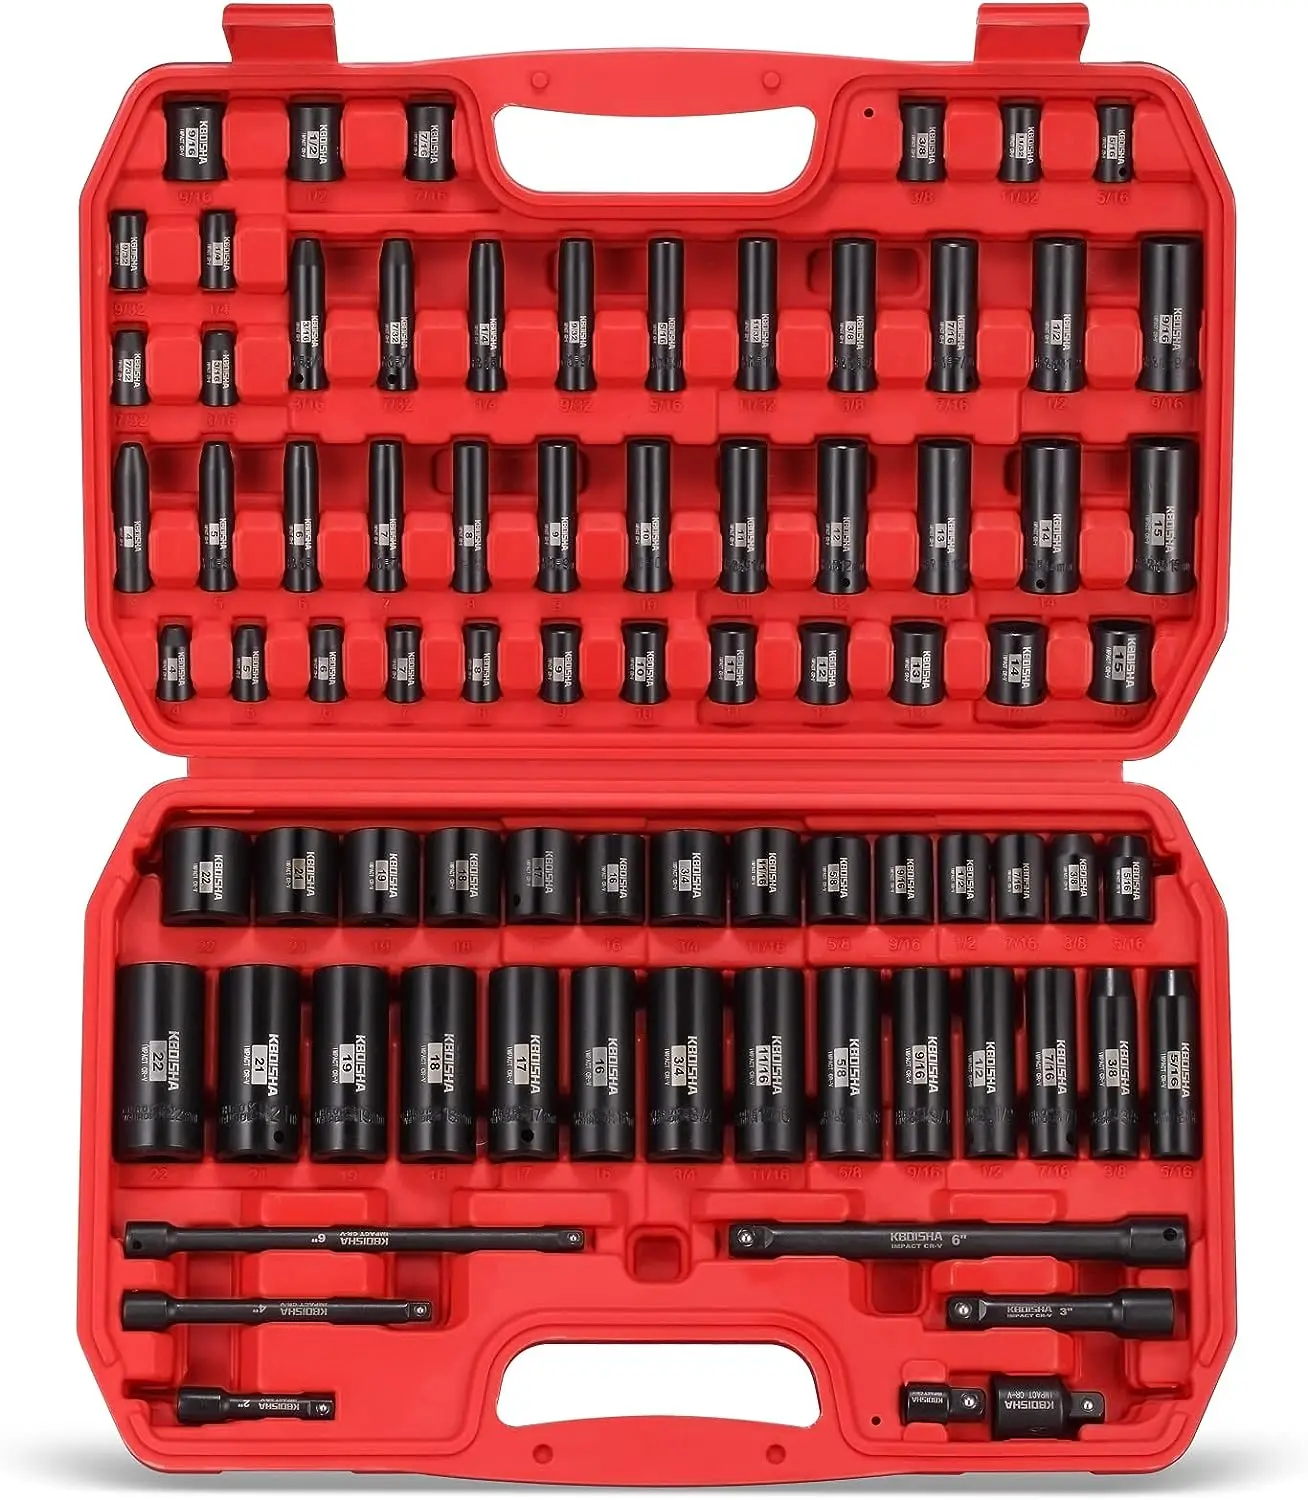 

3/8" Drive Socket Set,79-Piece 6 Point Socket Set Standard SAE and Metric Sizes CR-V Steel Sockets with Bit Adapter & R